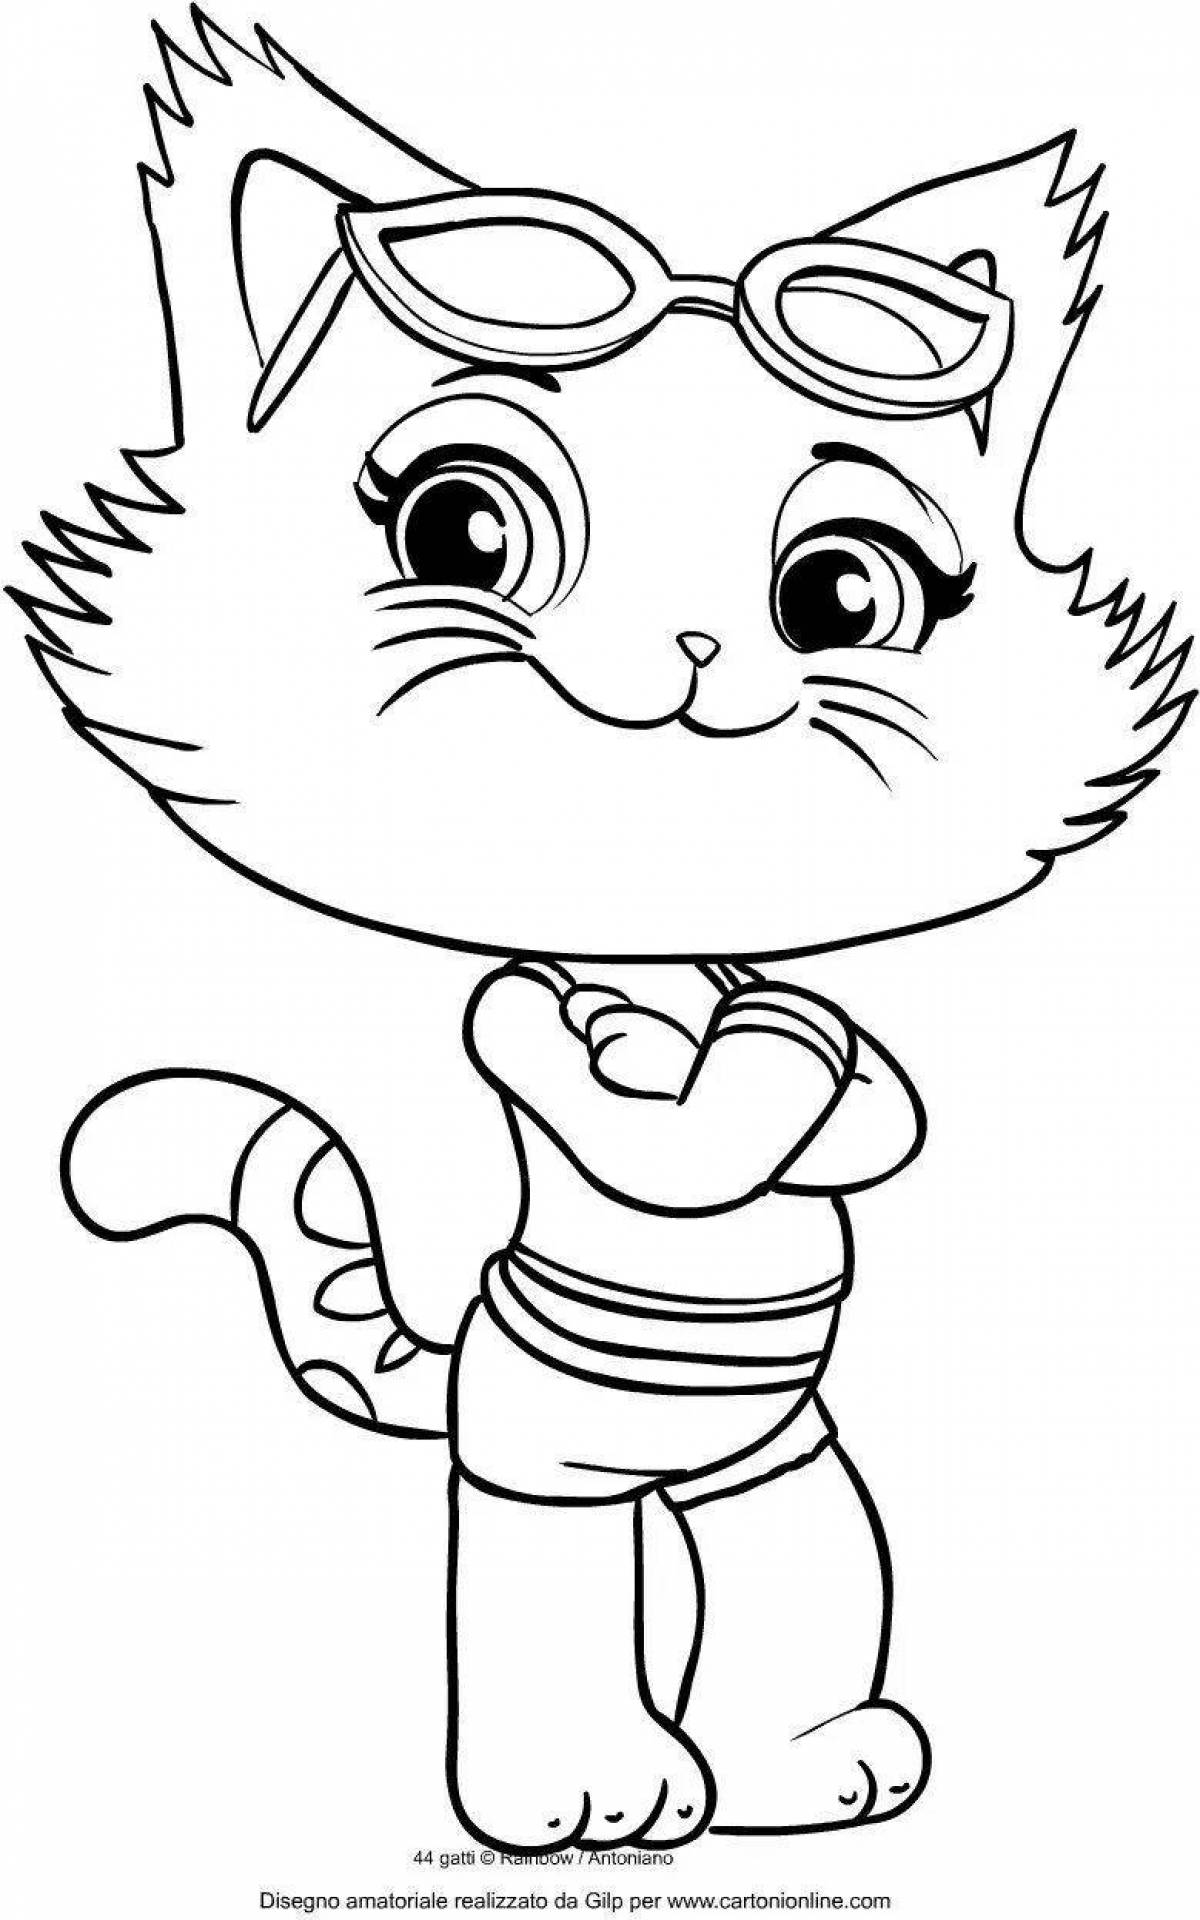 Funny kitty coloring book for kids